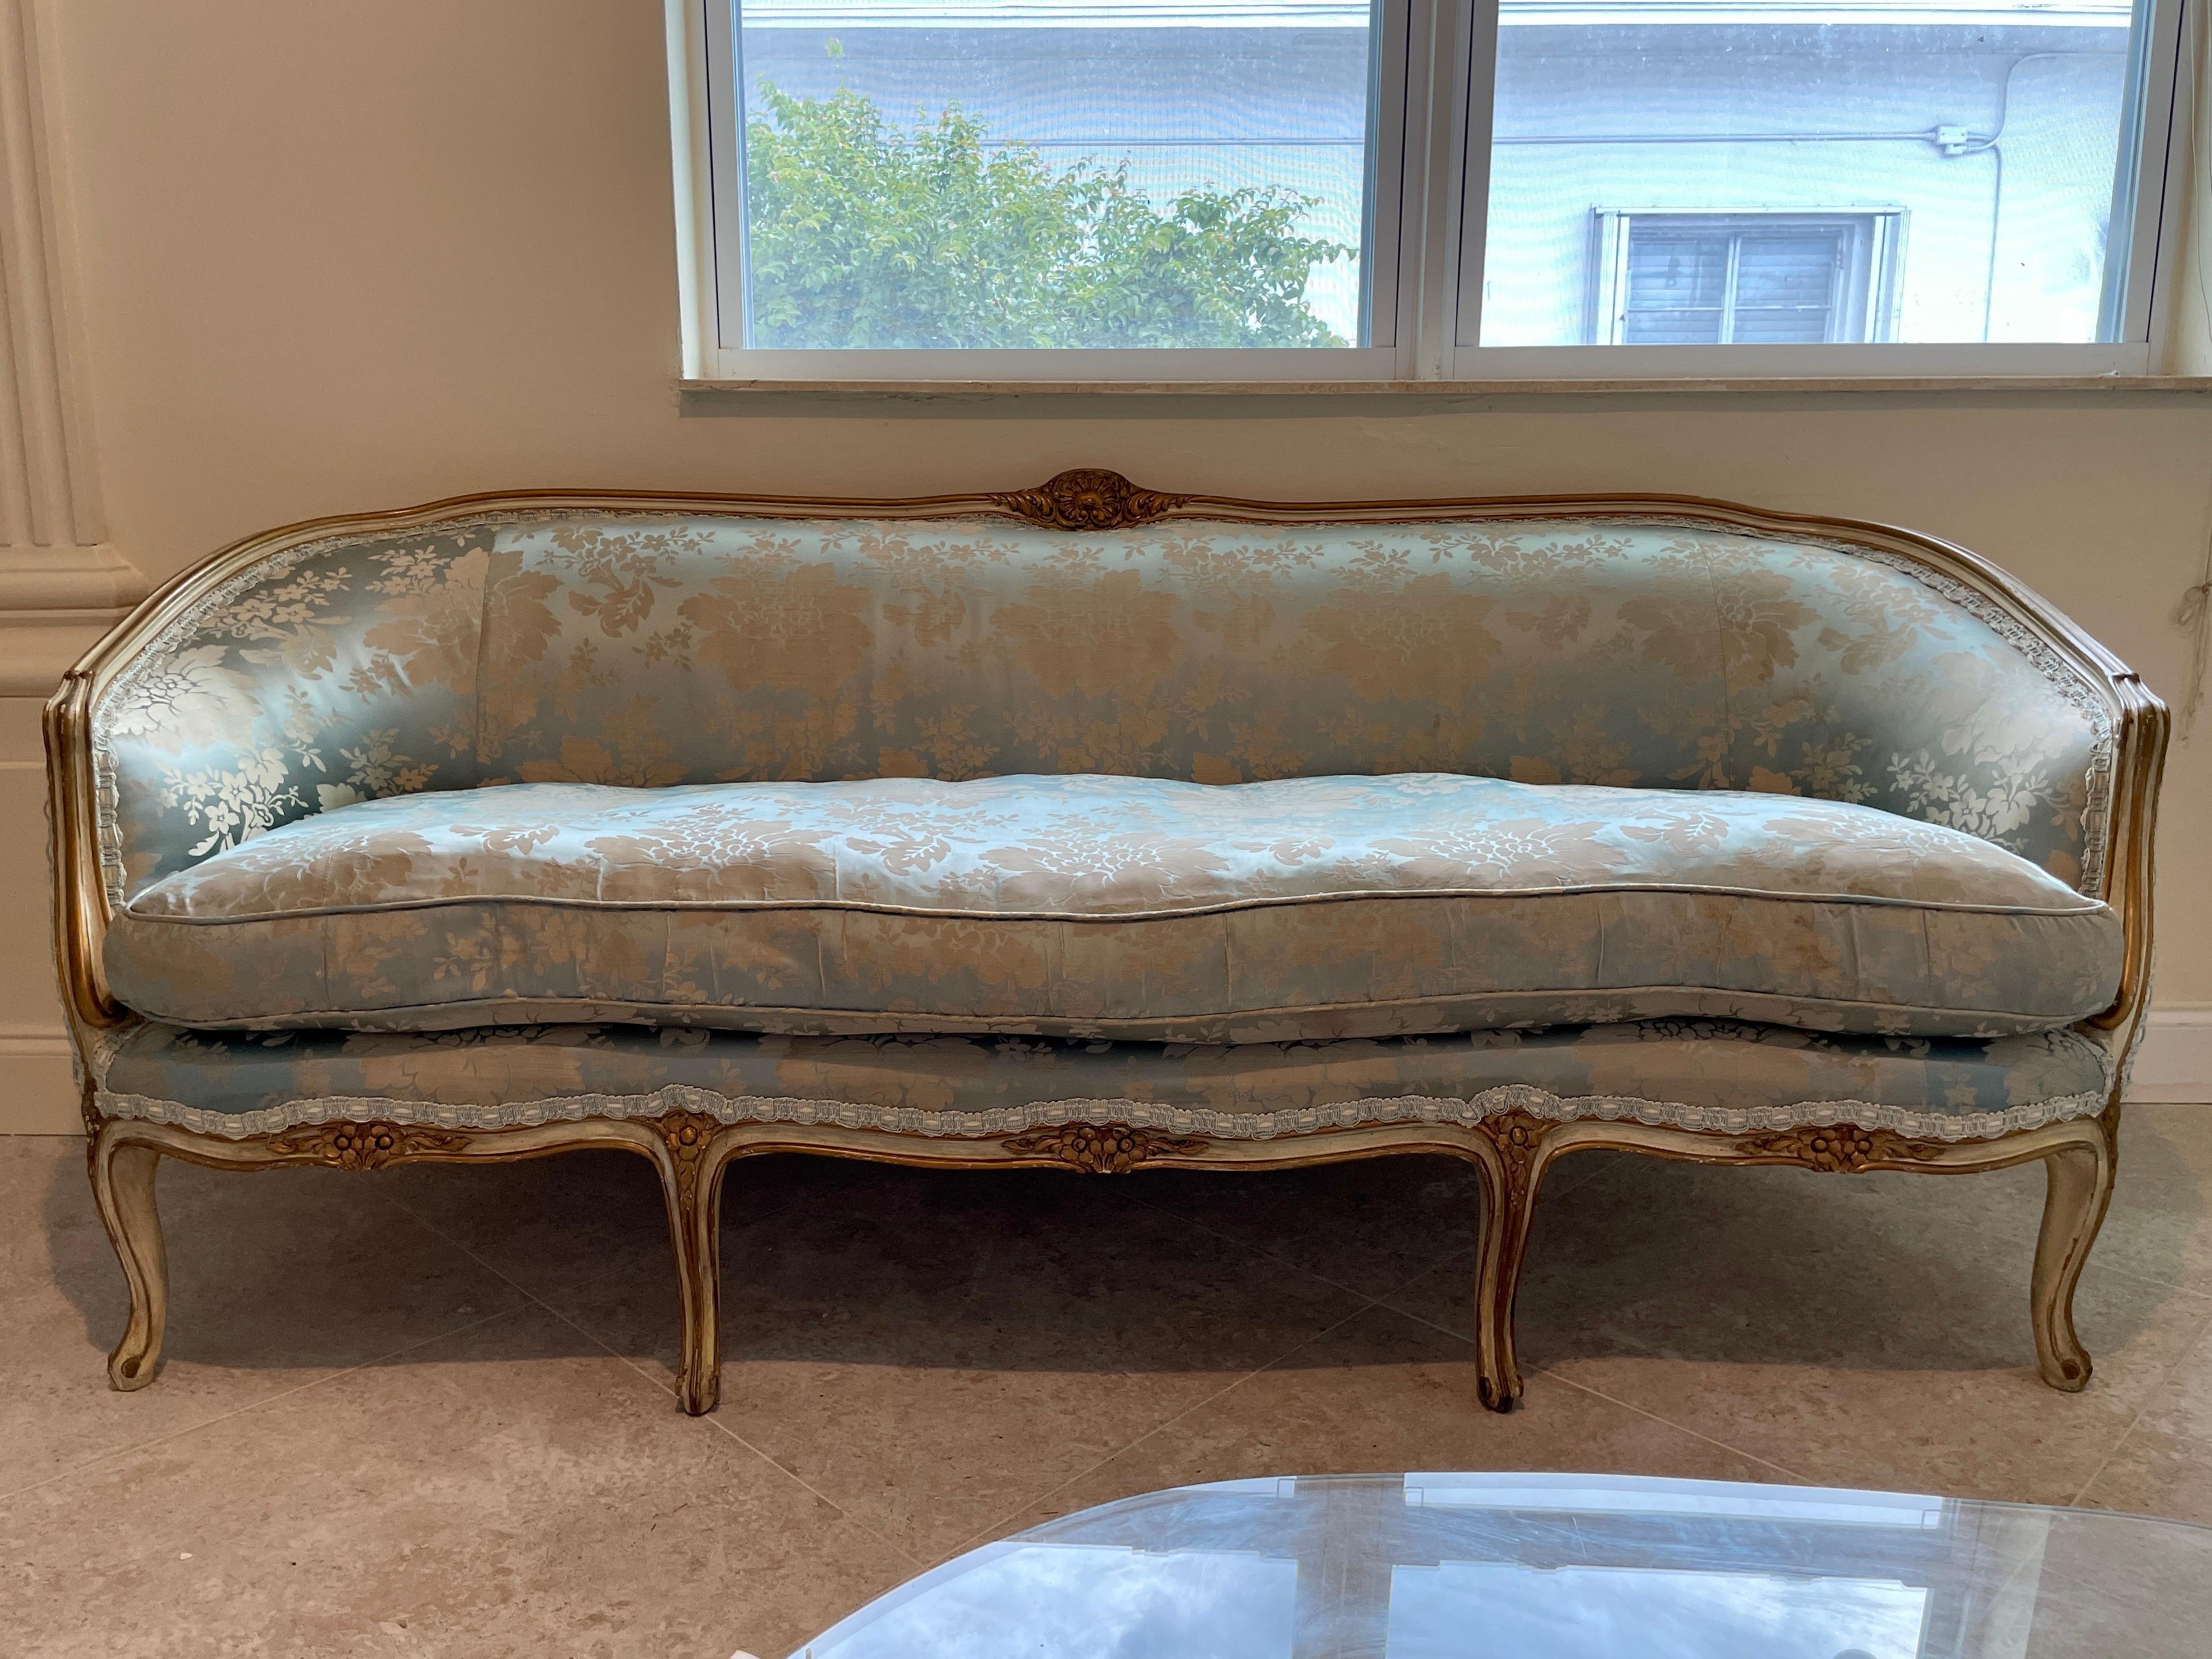 Gorgeous French Louis XV style sofa in blue silk Damask with super comfortable down cushion. Original painted finish is off white and gold details. There are some discolored fabric sections as it is the original upholstery, but could be kept as is